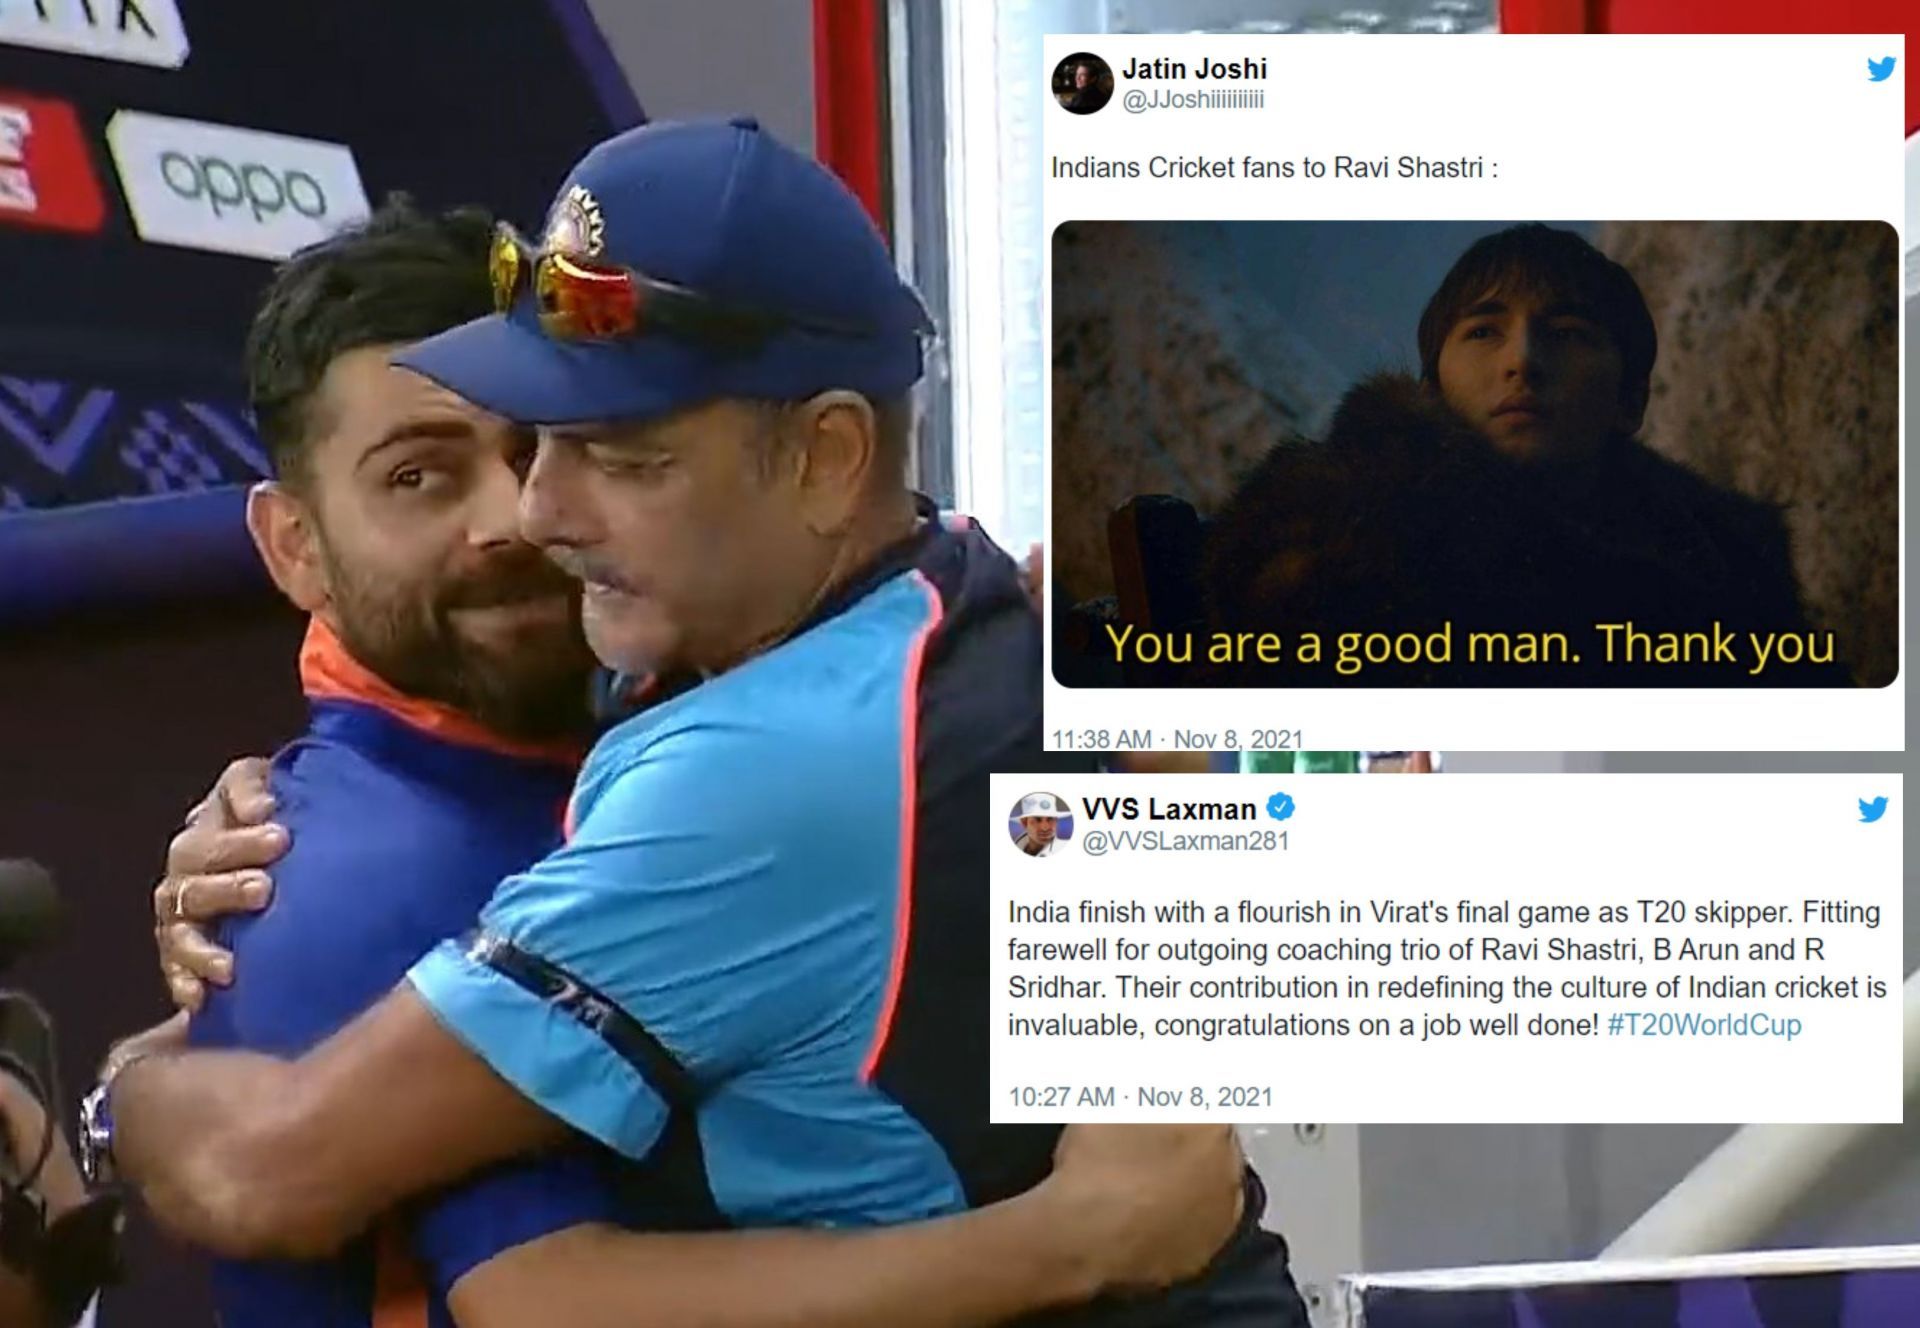 Twitterati pays tribute to Ravi Shastri and co for their contribution to Team India in the past few years